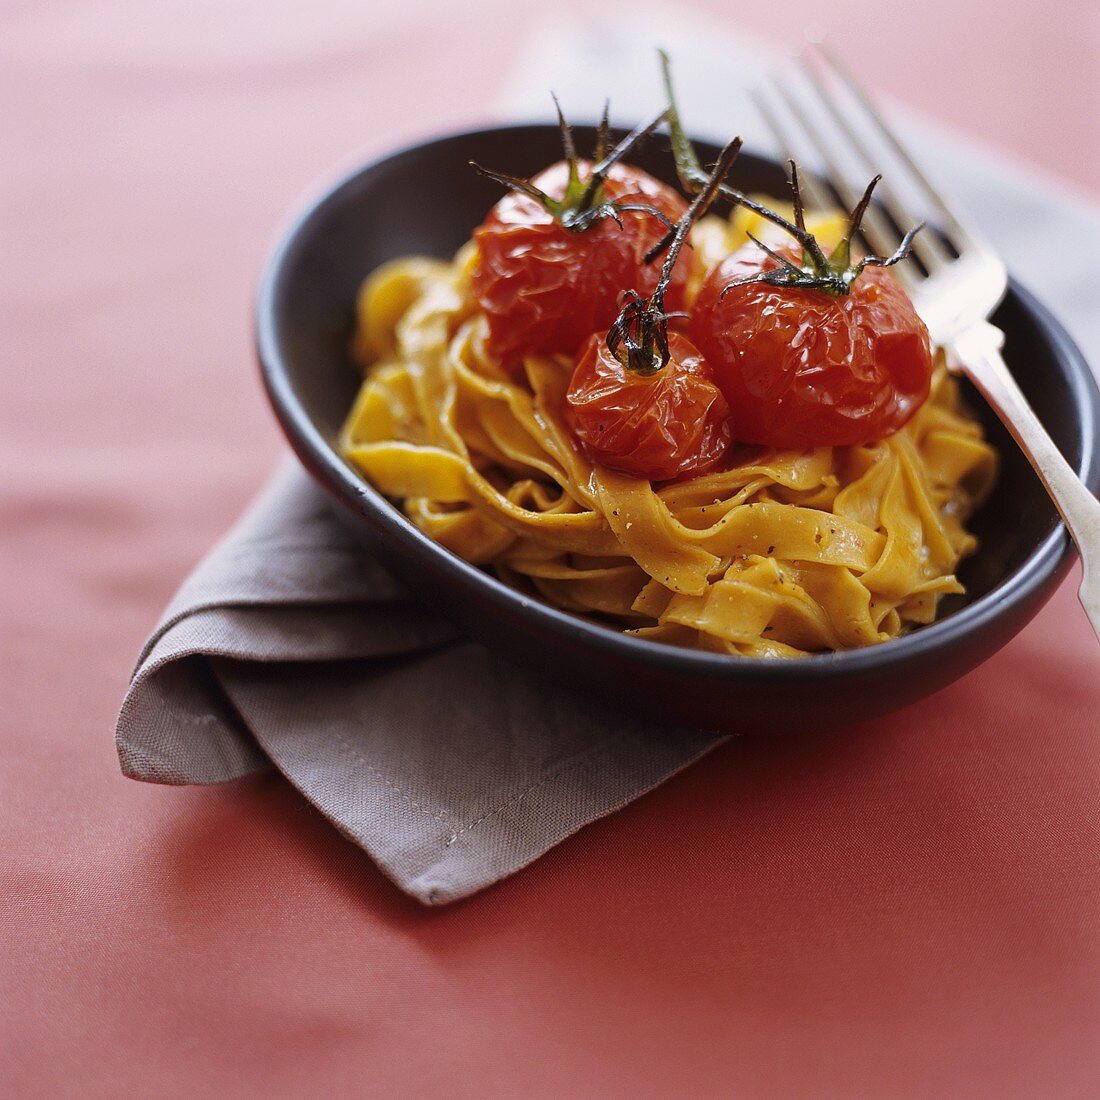 Chilli noodles with garlic and baked cherry tomatoes